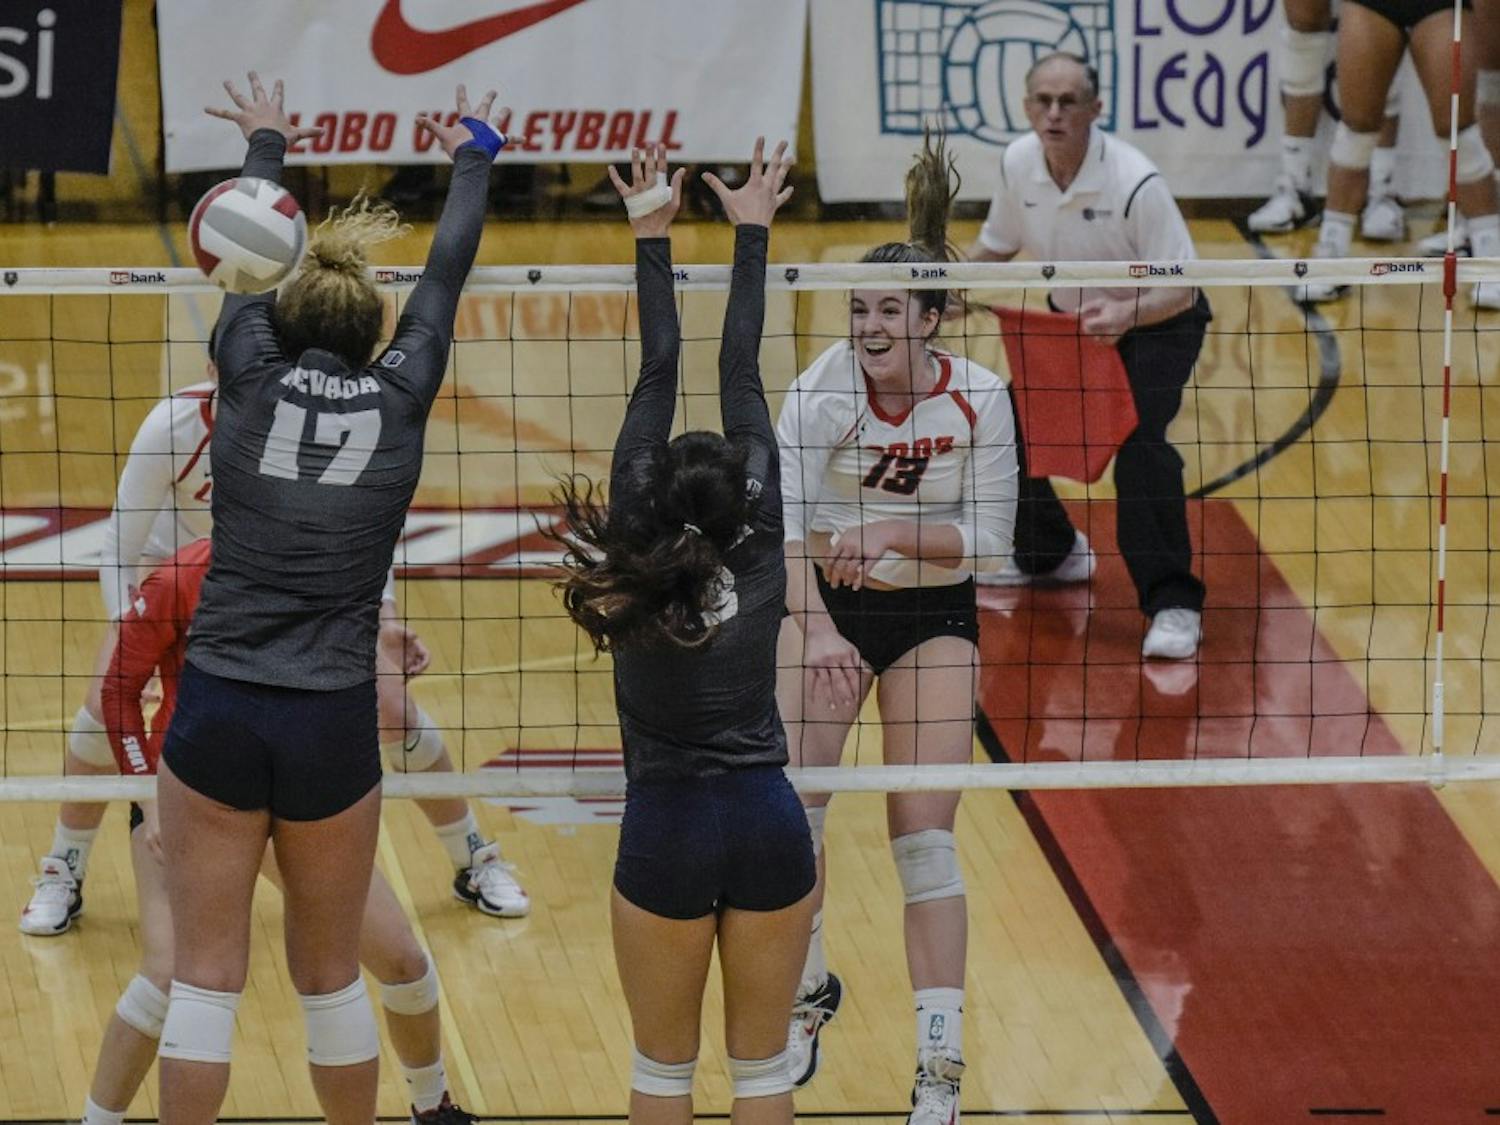 Hailey Rubino spikes the ball past University of Nevada blockers Shayla Hoeft&nbsp; and Dalyn Burns at UNM's Johnson Gym, November 4, 2017. The Lobos were defeated by the Wolf Pack, 3 sets to 1 on Saturday afternoon.&nbsp;